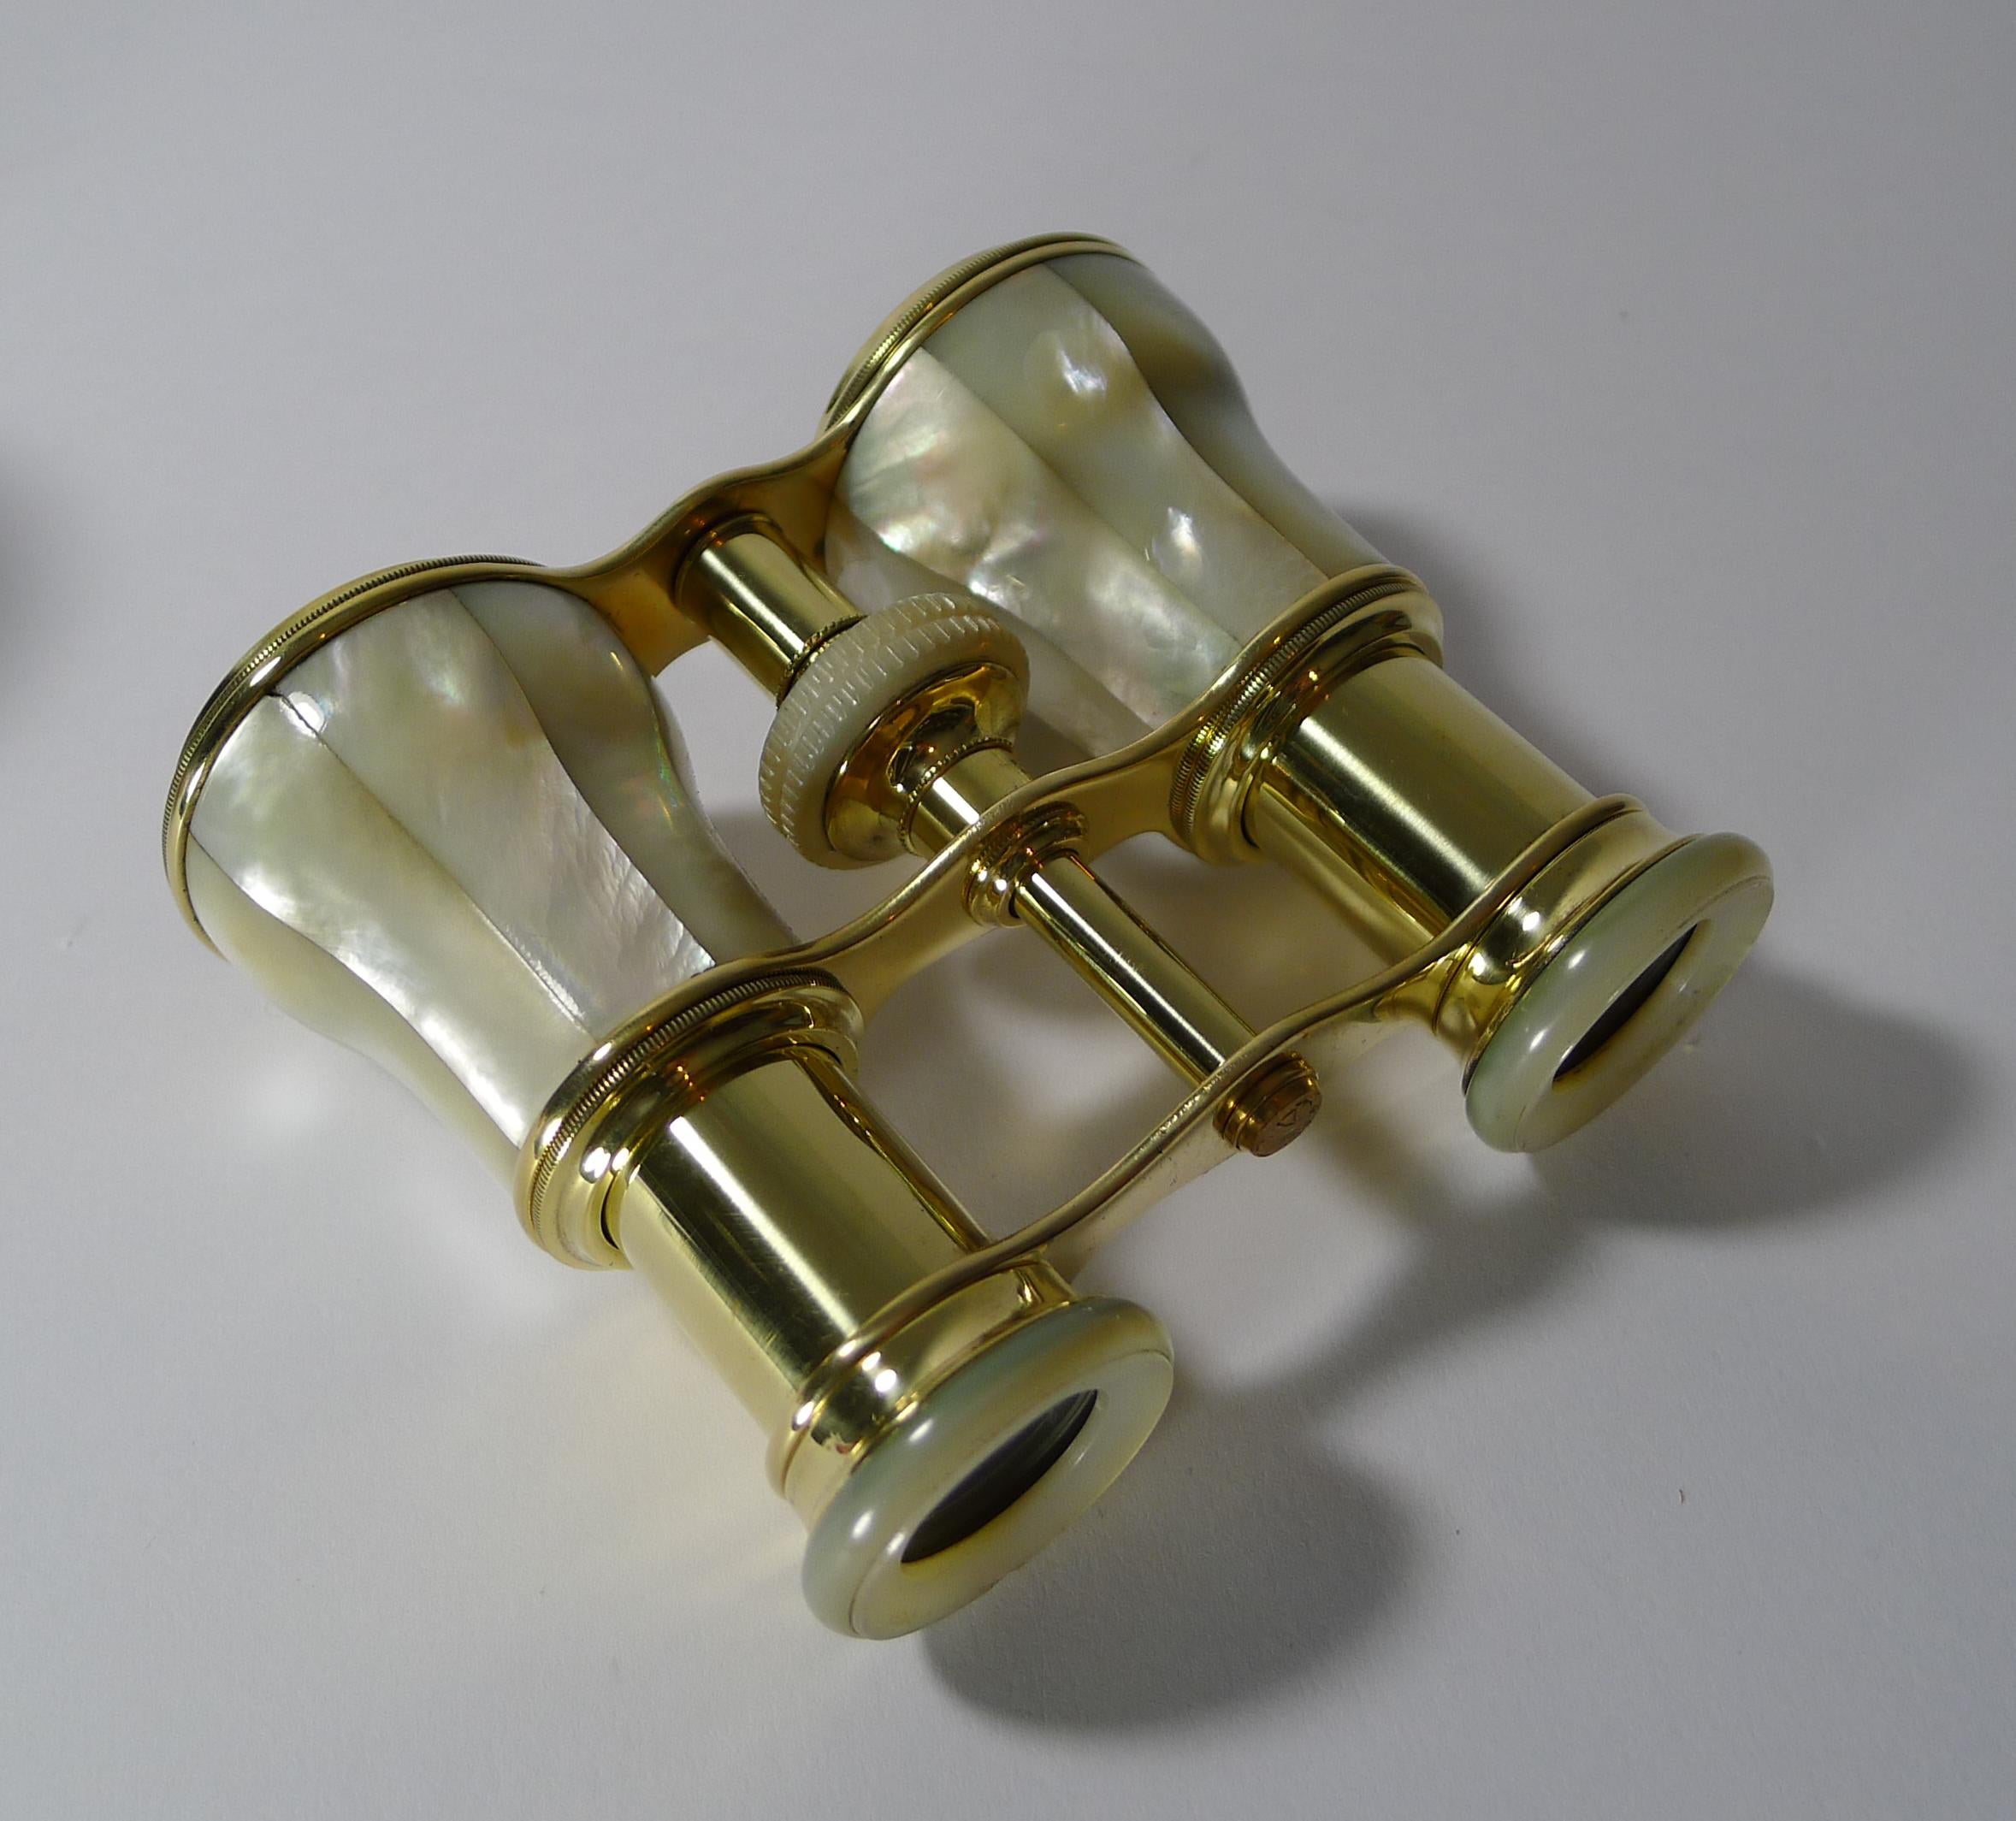 Edwardian Antique French Mother of Pearl Opera Glasses by Flammarion, Paris